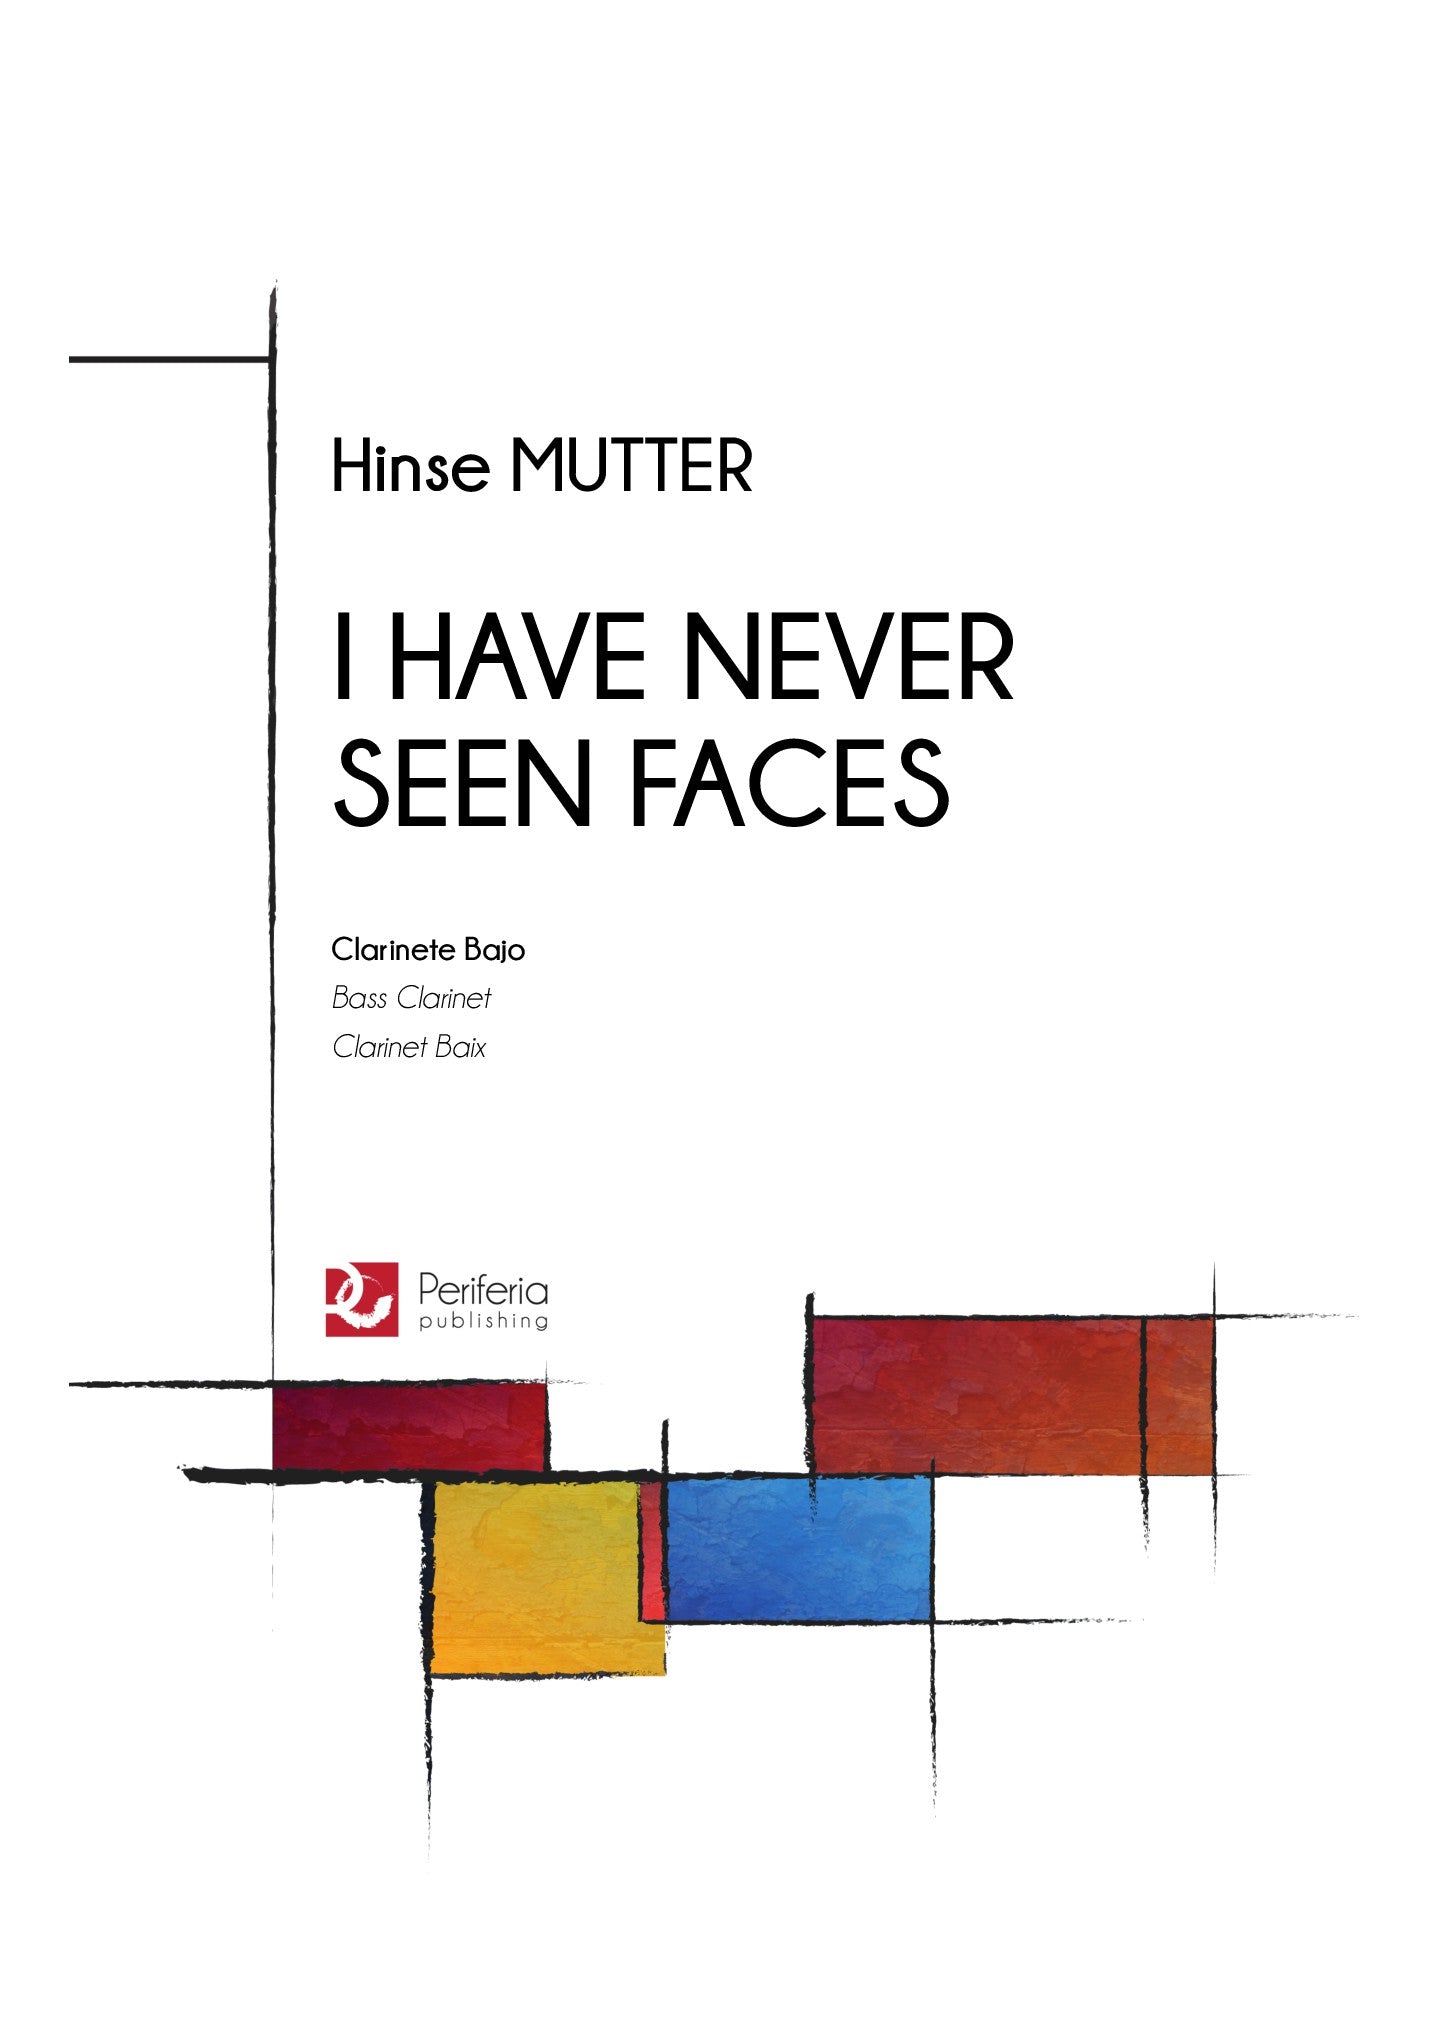 Mutter - I Have Never Seen Faces for Bass Clarinet Solo